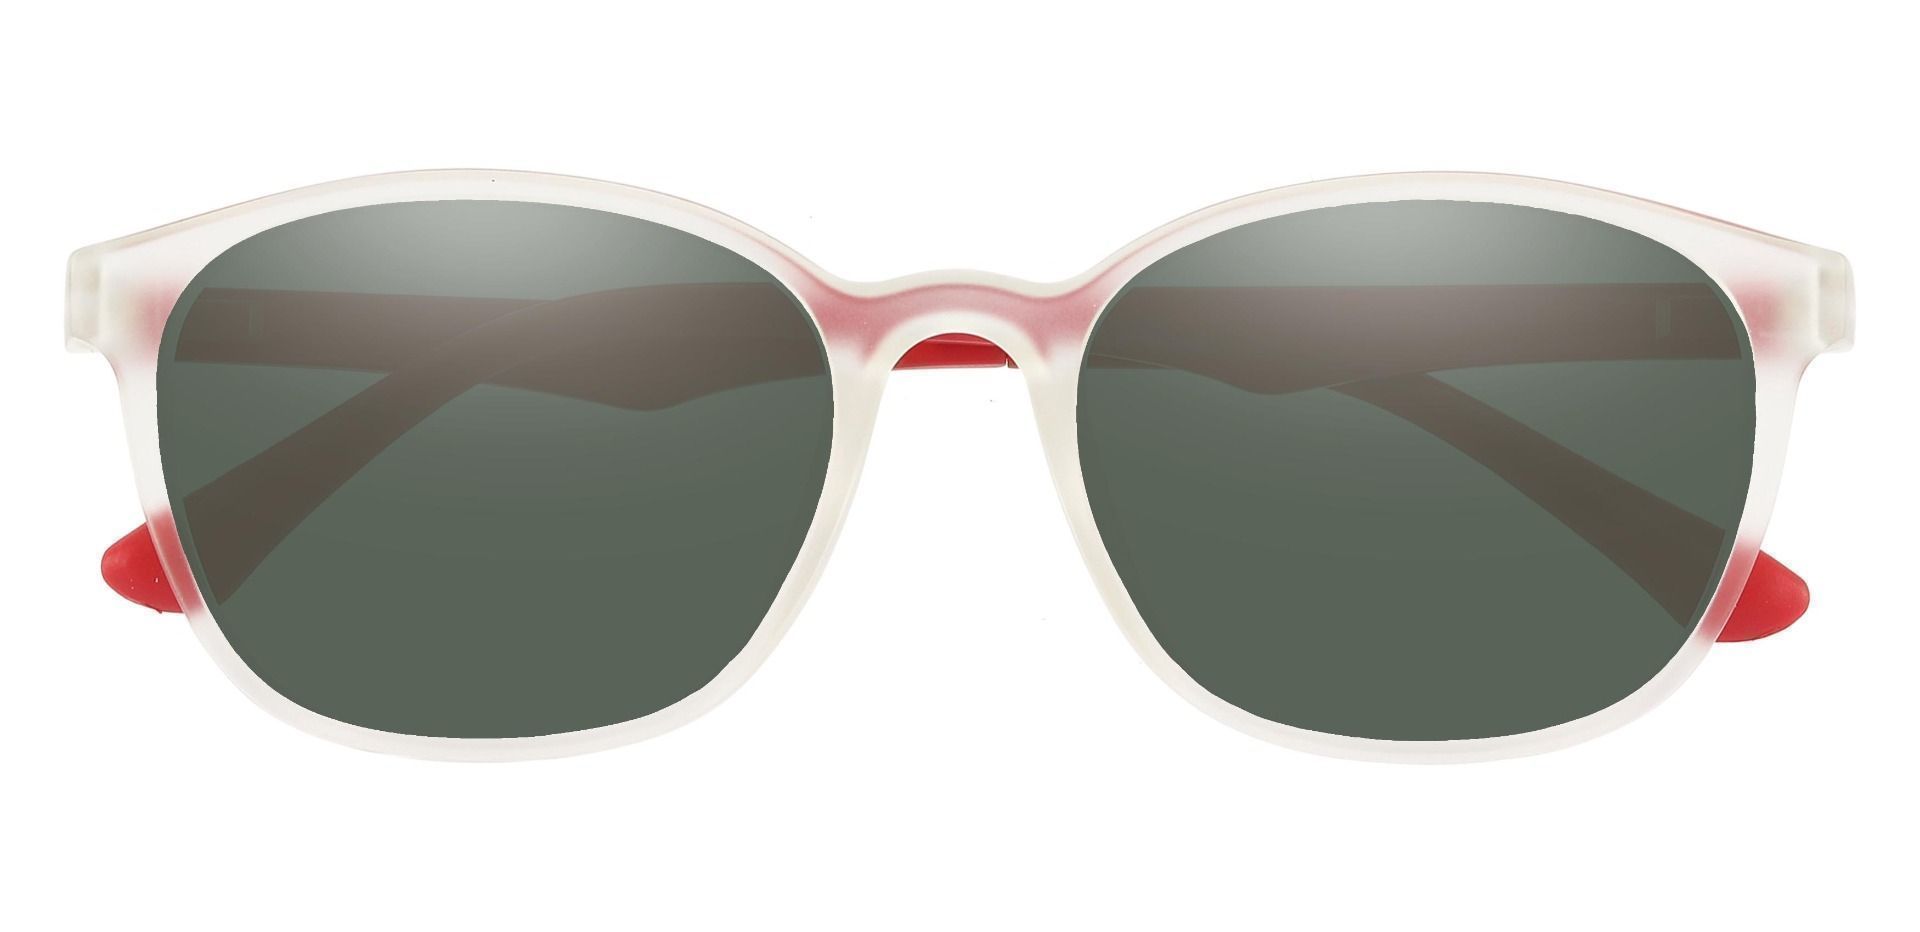 Ursula Oval Non-Rx Sunglasses - Clear Frame With Green Lenses